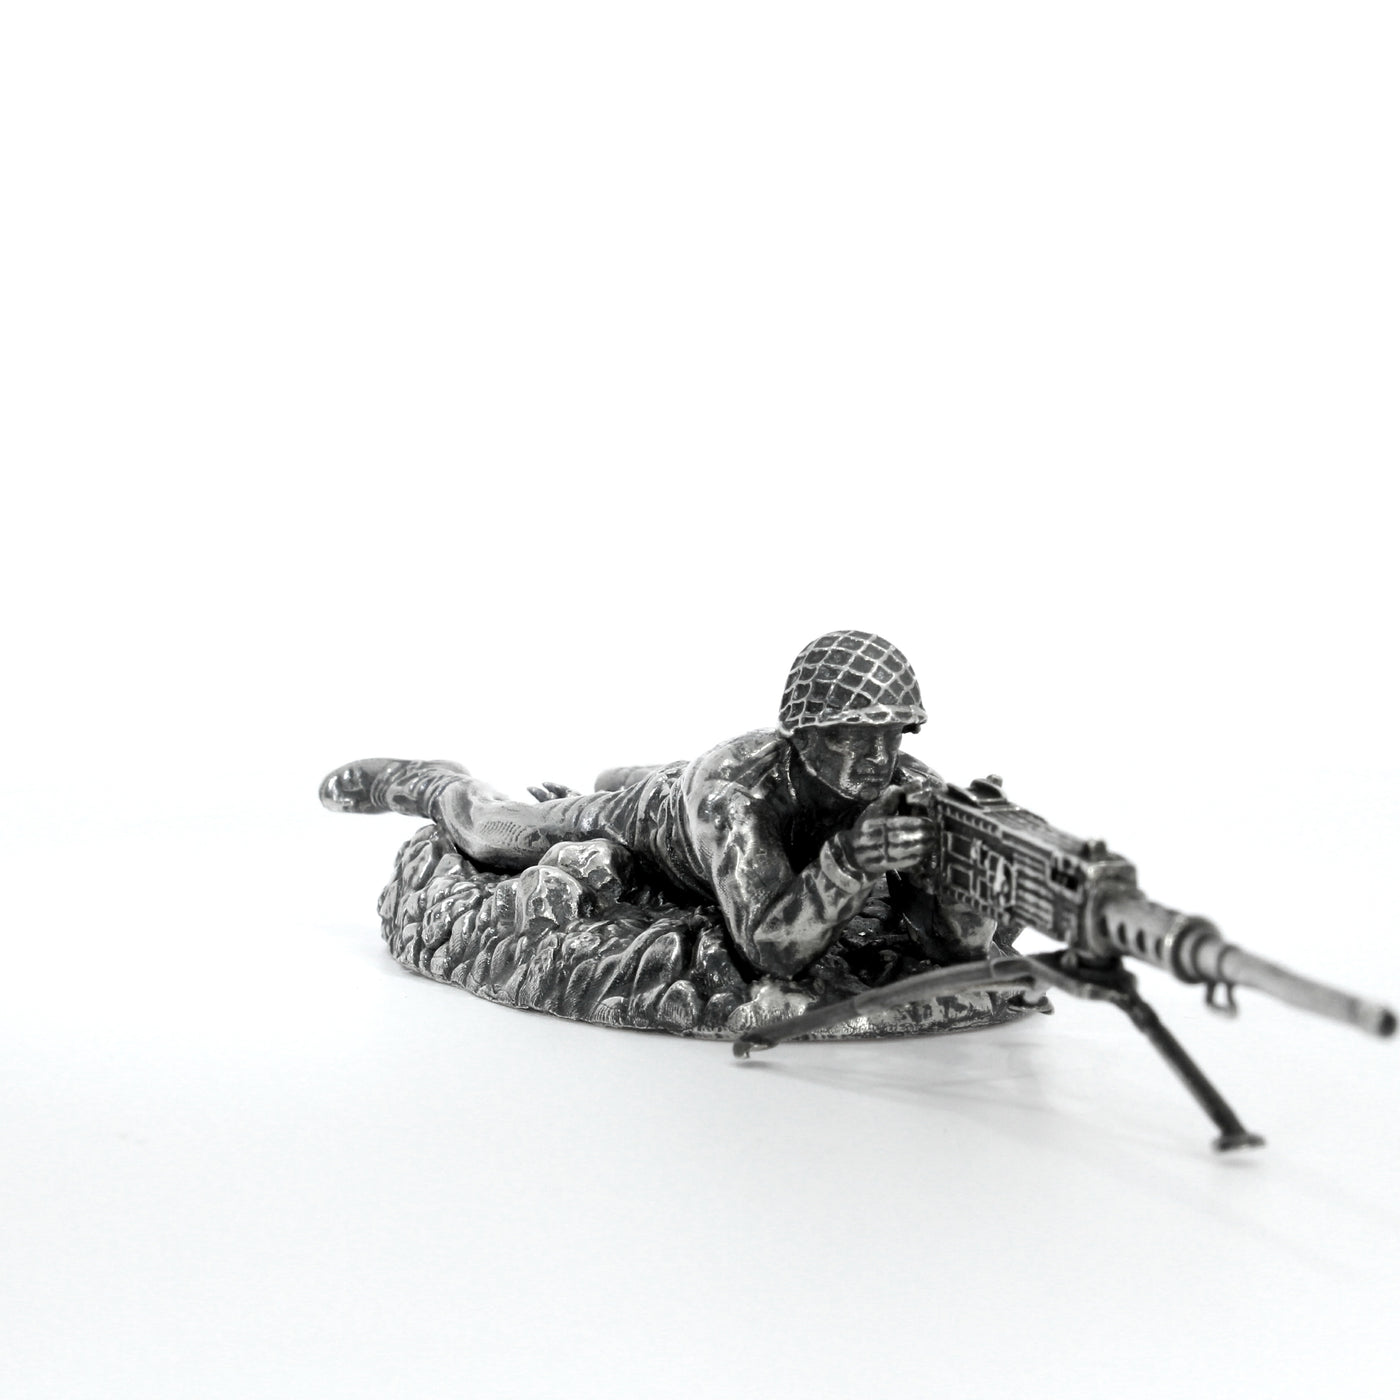 Browning Operator "Trigger Ted" - Silver Soldier - SilverStatues.com